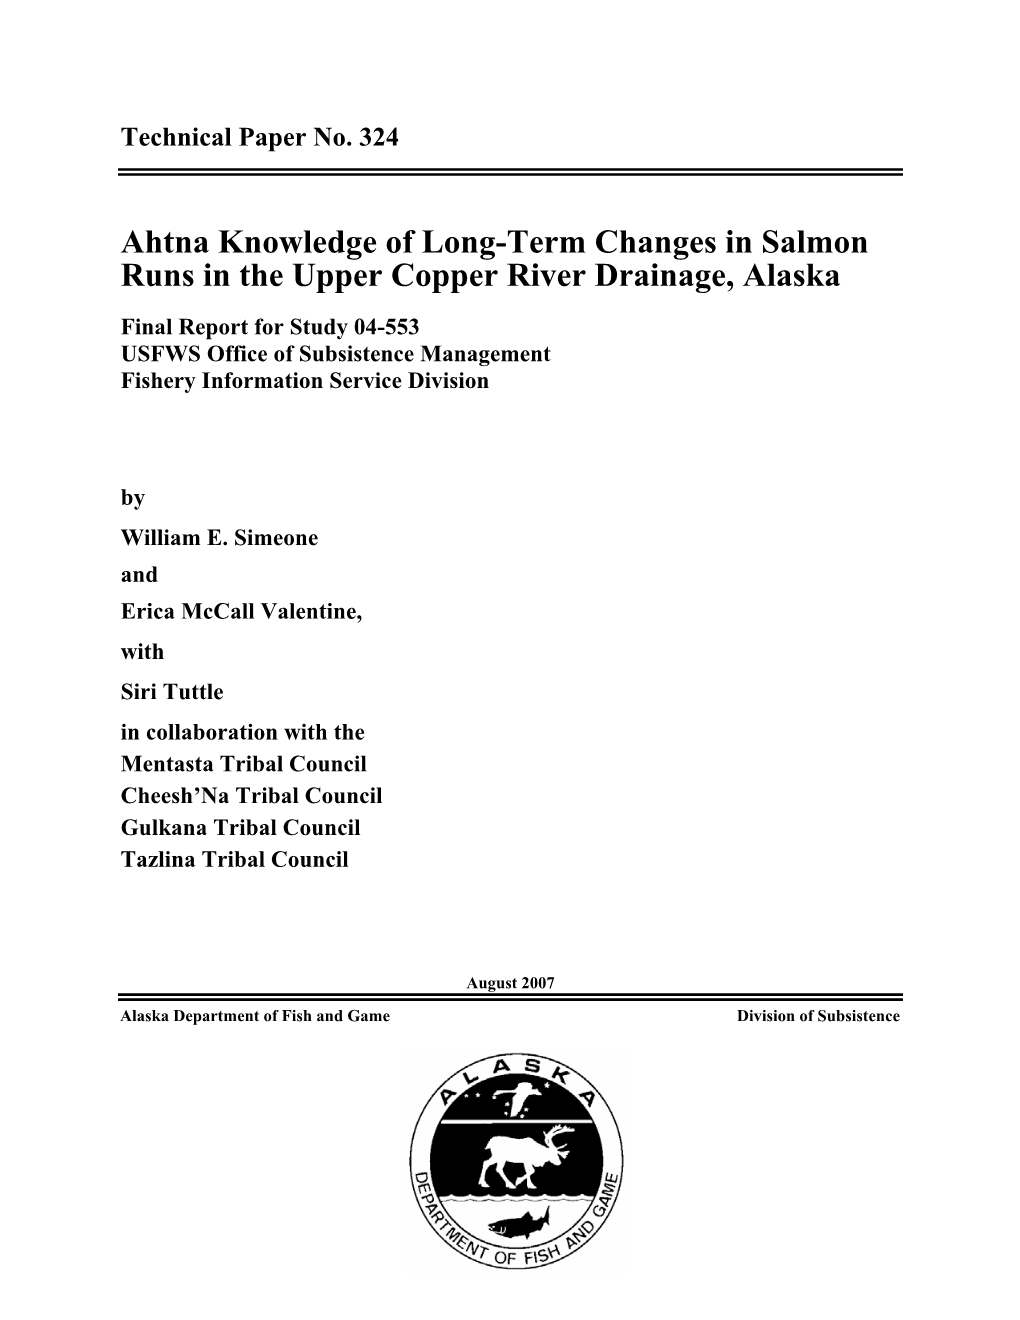 Ahtna Knowledge of Long-Term Changes in Salmon Runs in The